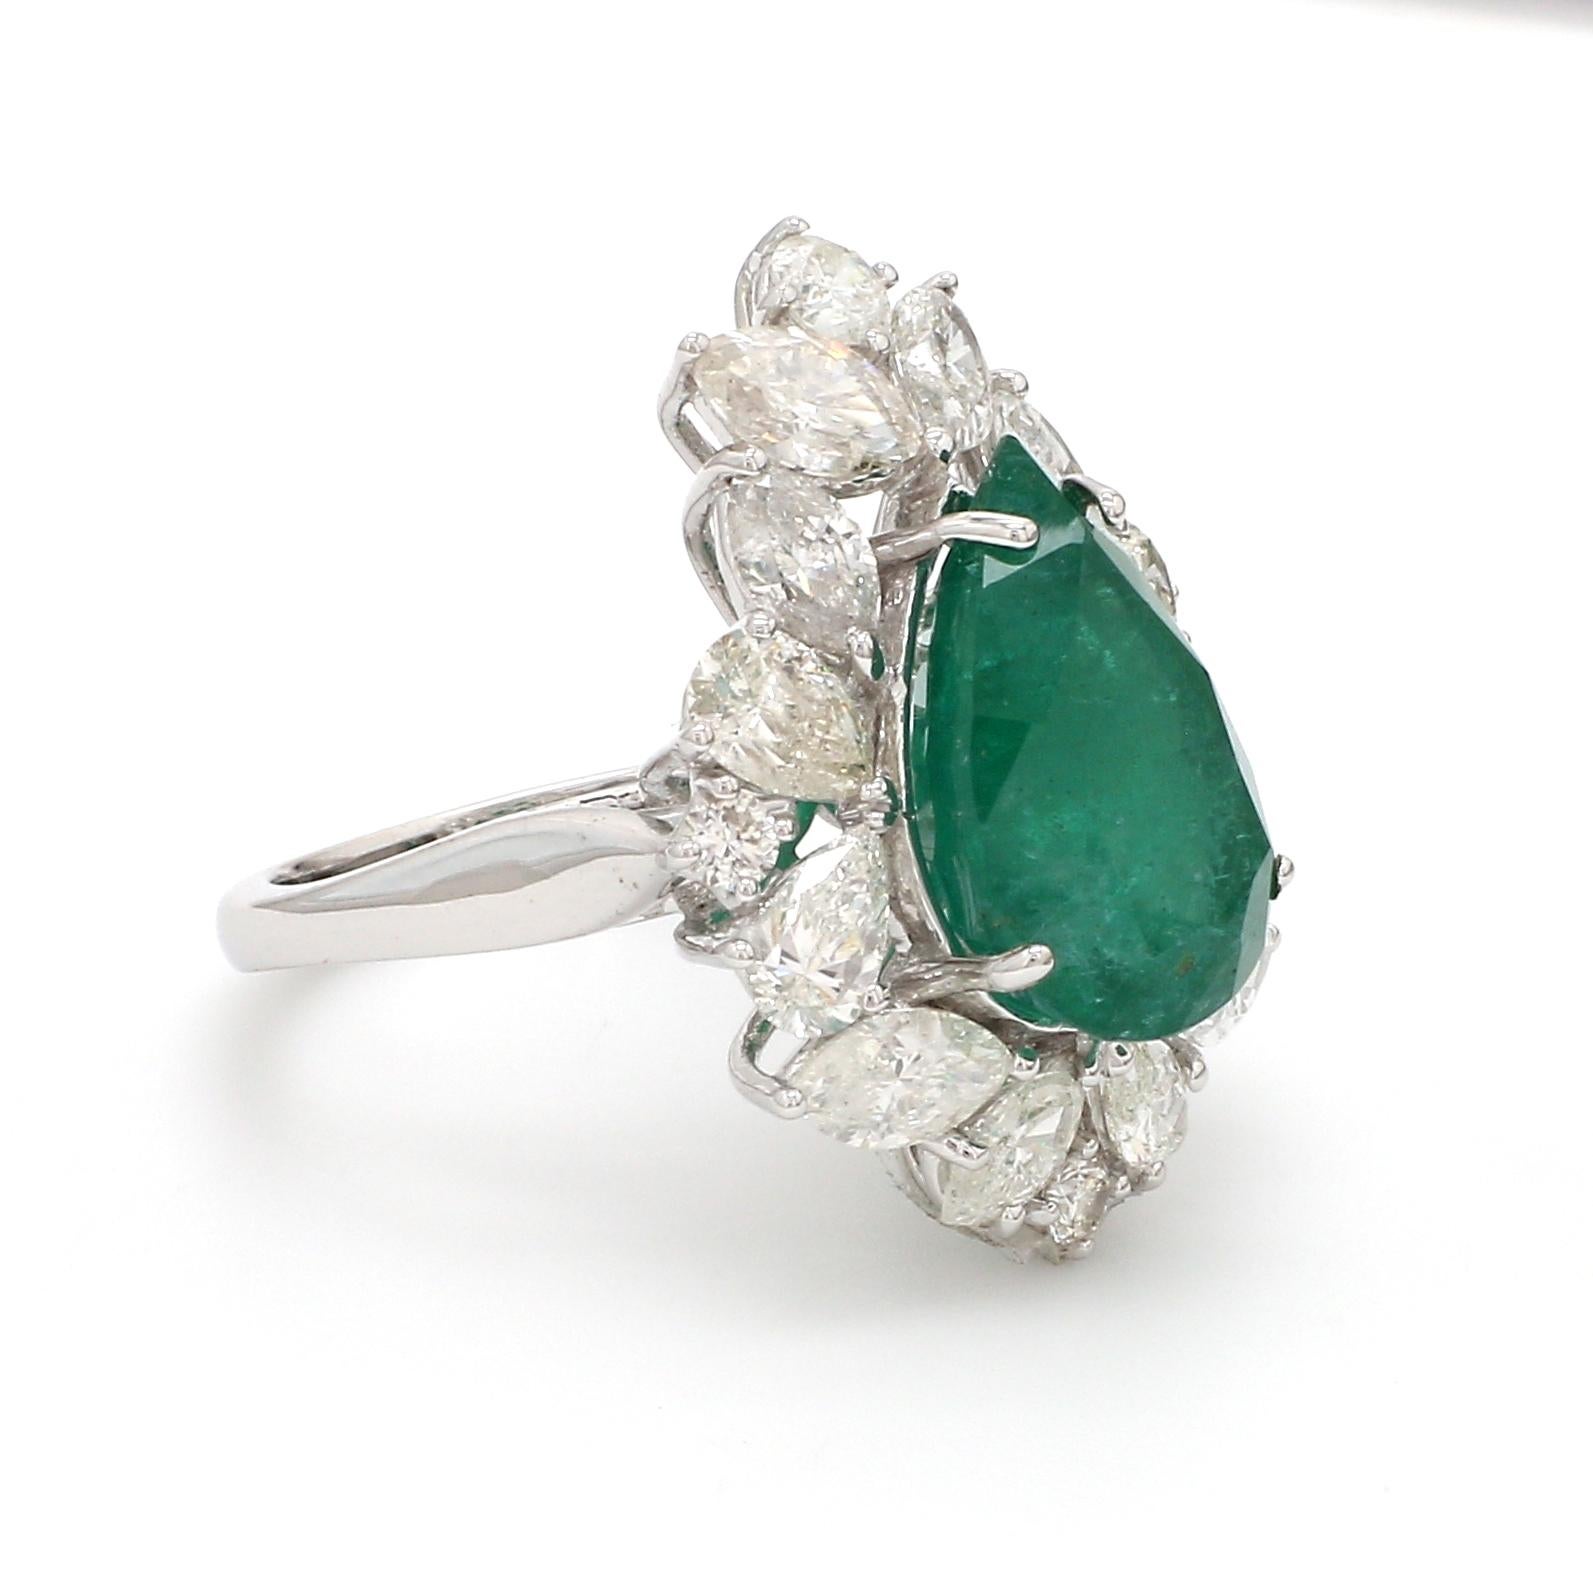 For Sale:  Pear Natural Emerald Gemstone Ring Diamond Solid 18k White Gold Fine Jewelry 2